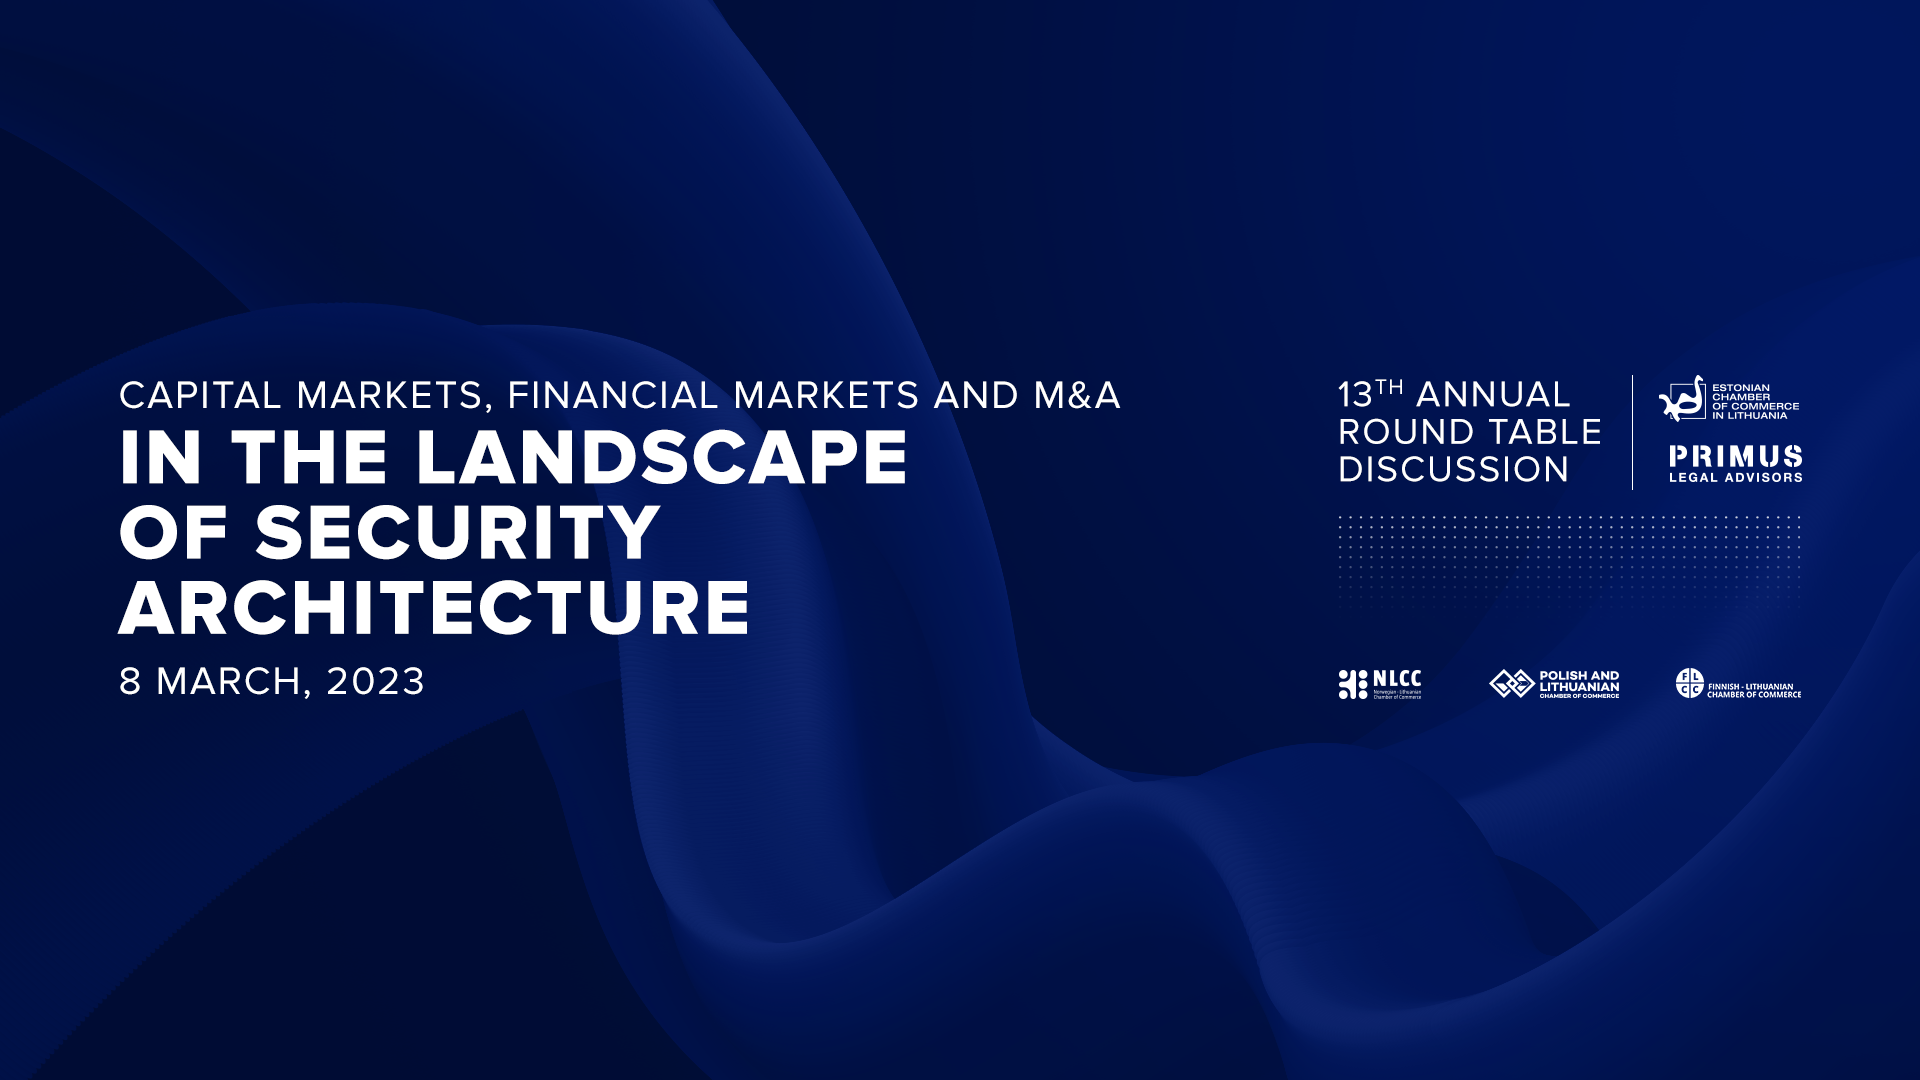 CAPITAL MARKETS, FINANCIAL MARKETS AND M&A IN THE LANDSCAPE OF SECURITY ARCHITECTURE